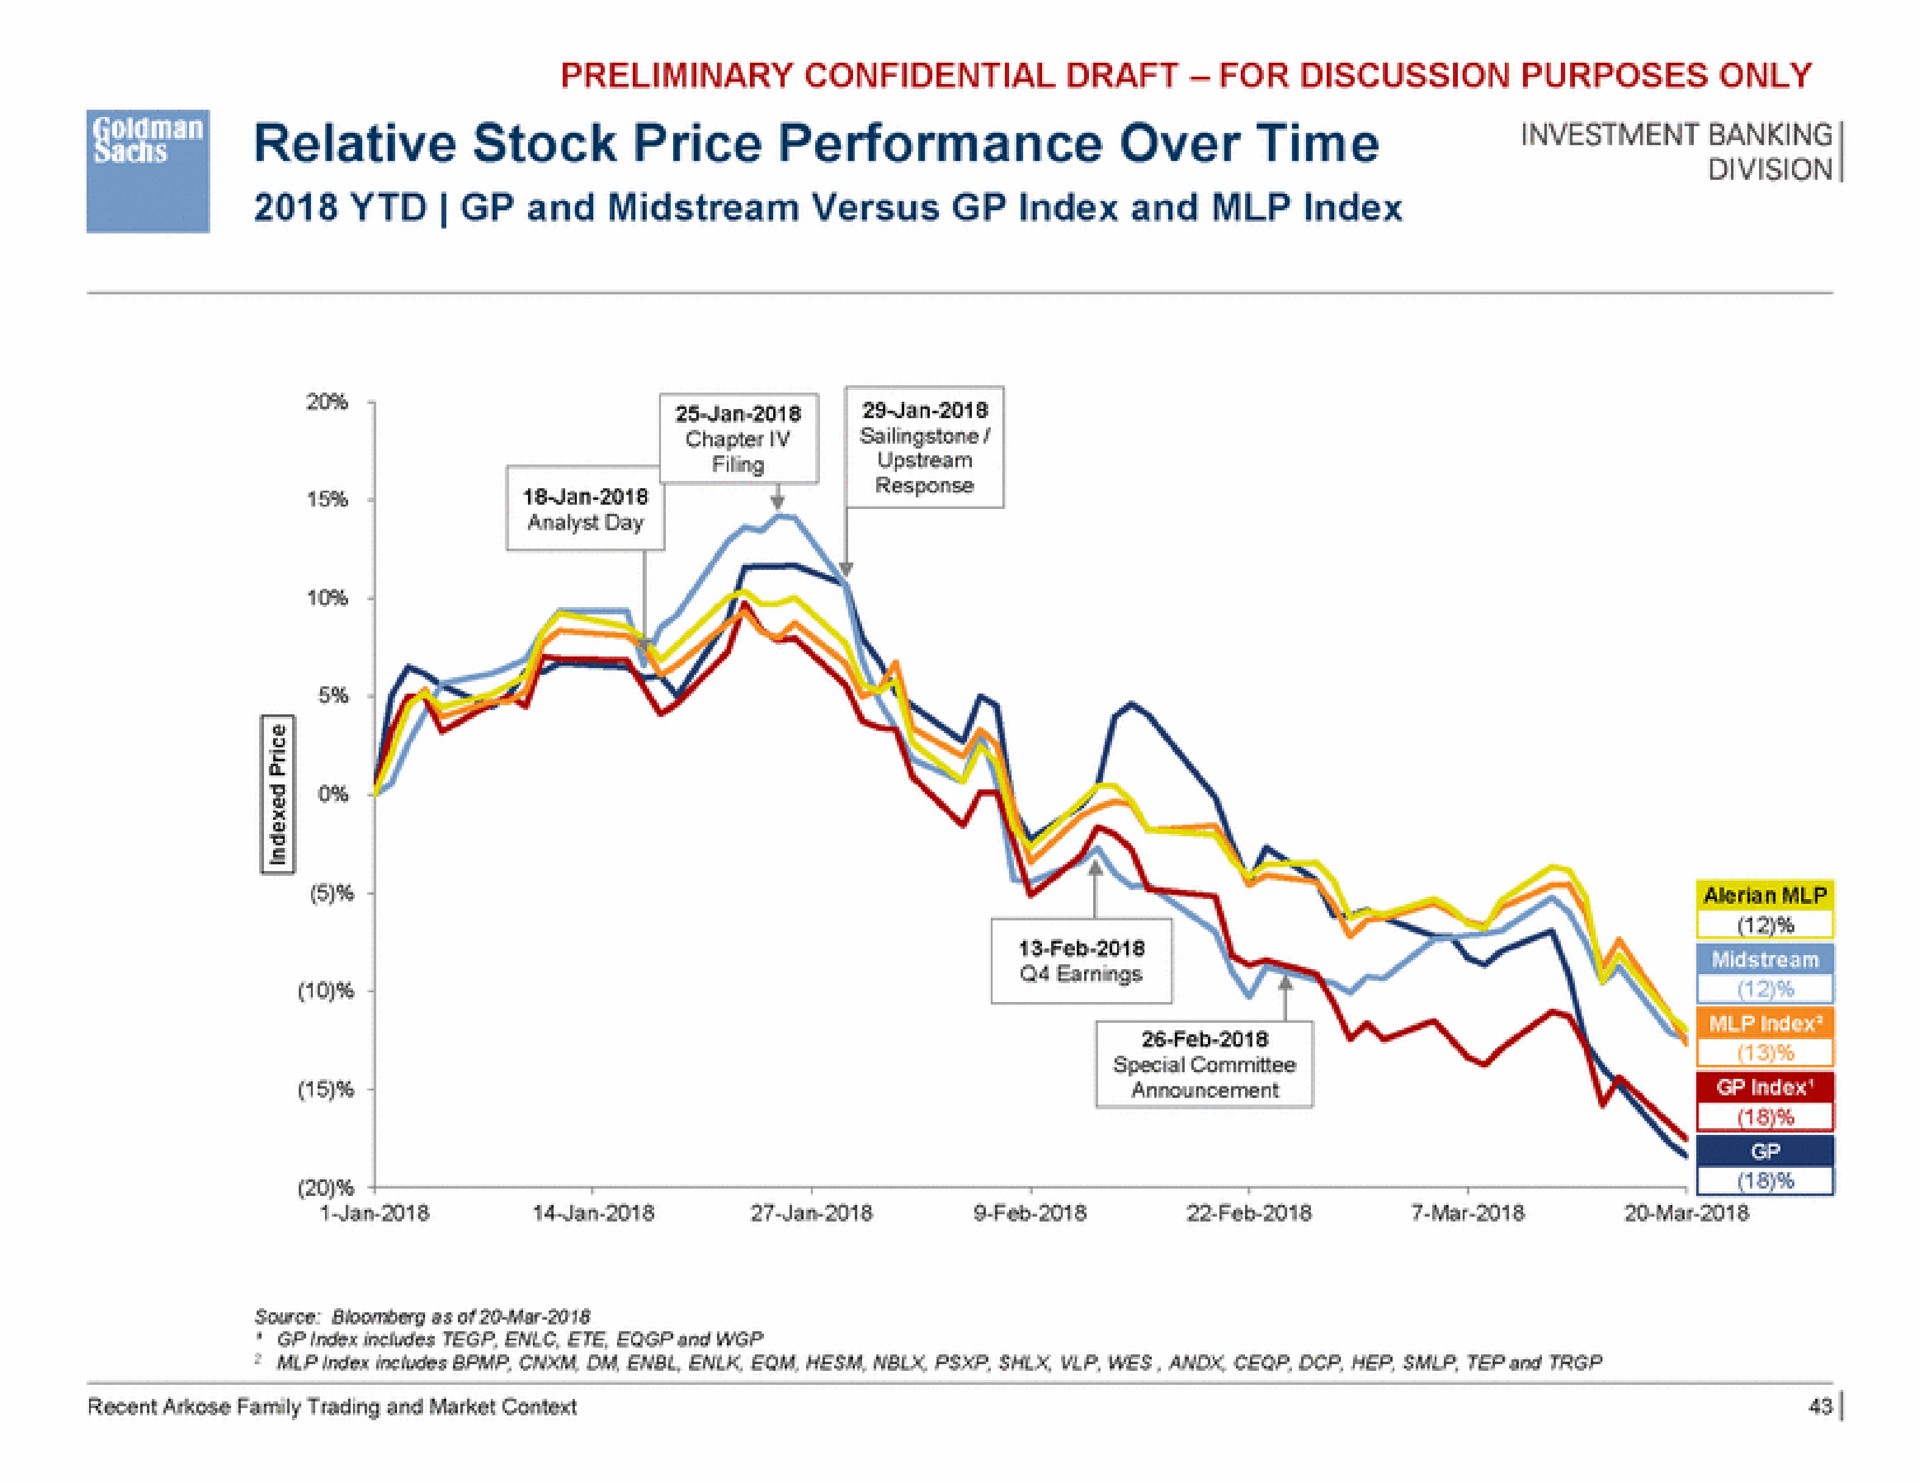 relative stock price performance over time investment banking | Goldman Sachs